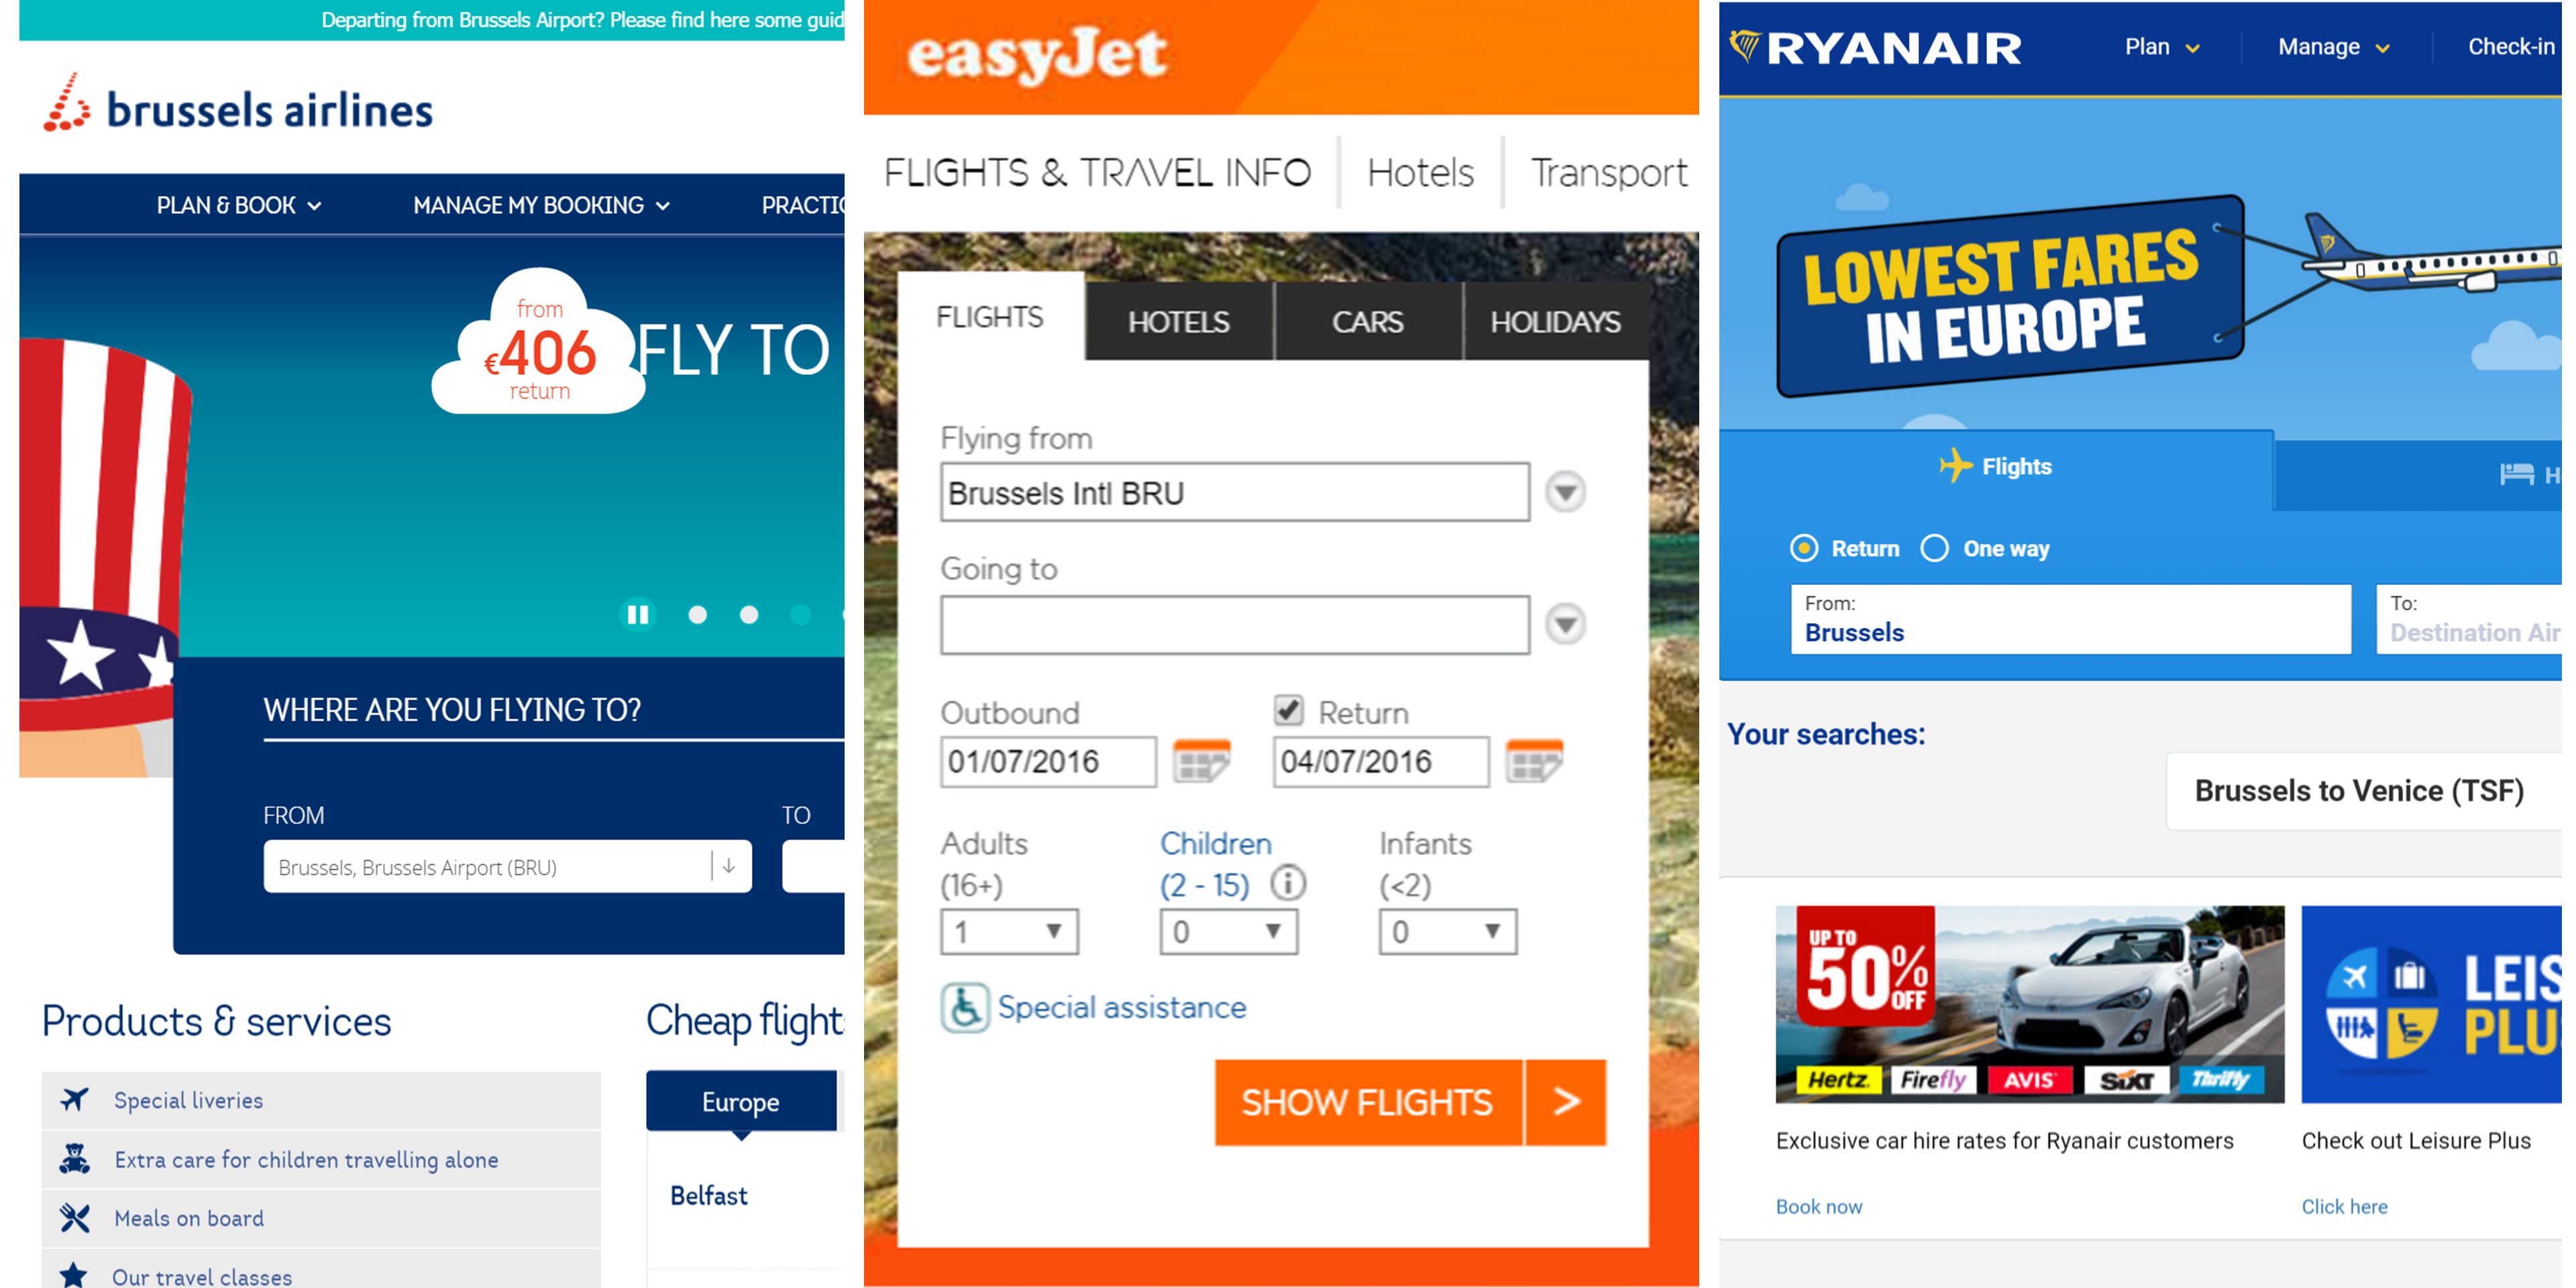 Airlines website usability